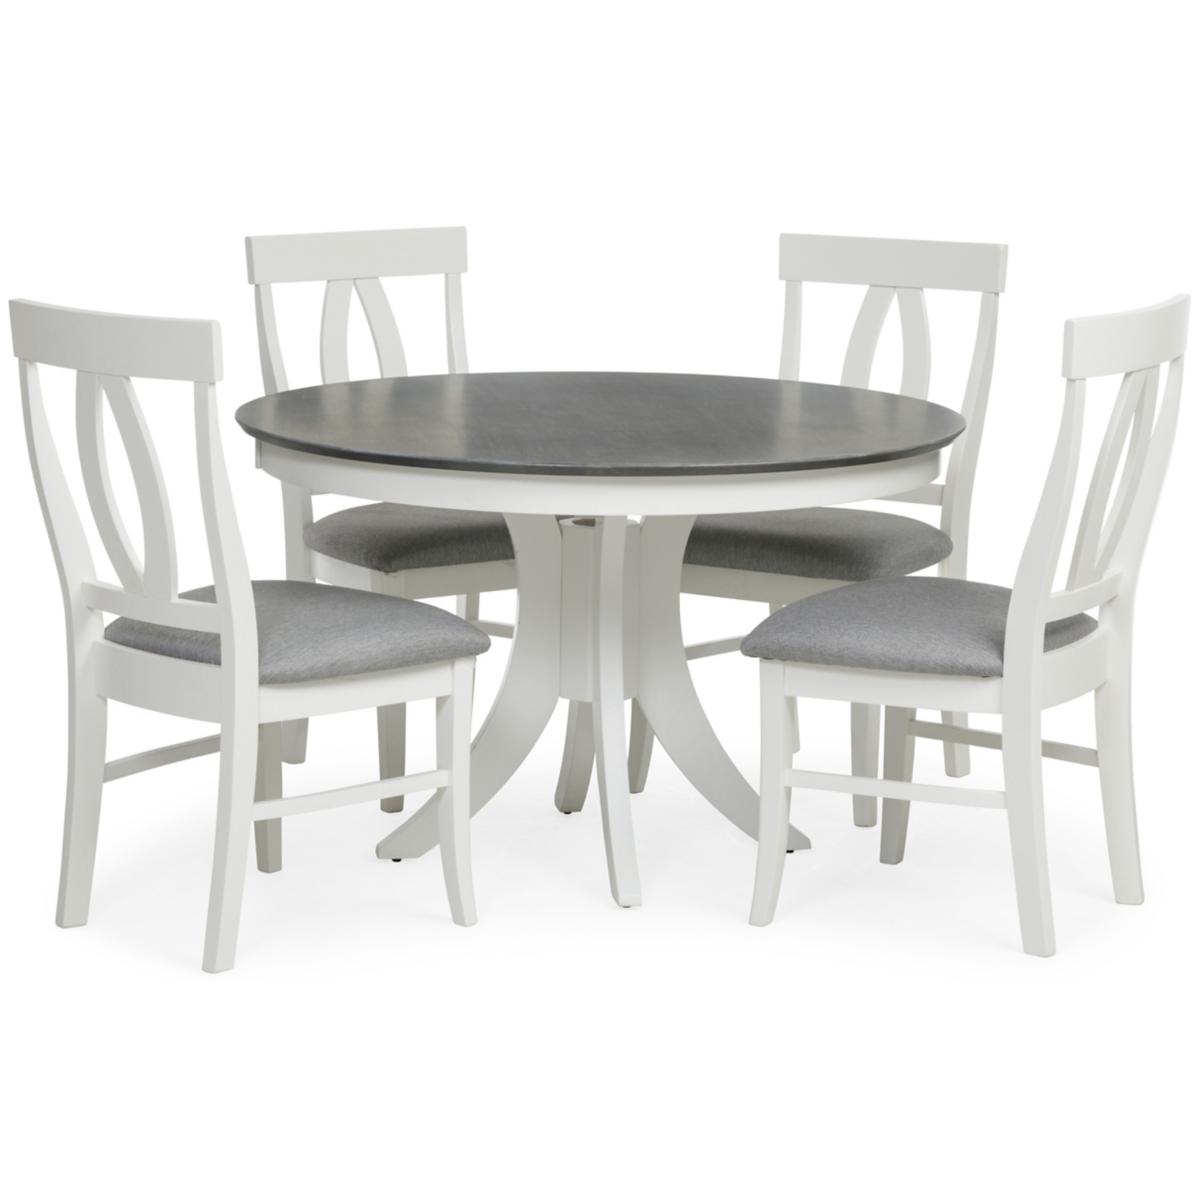 Grey And White Dining Table - Joeryo ideas